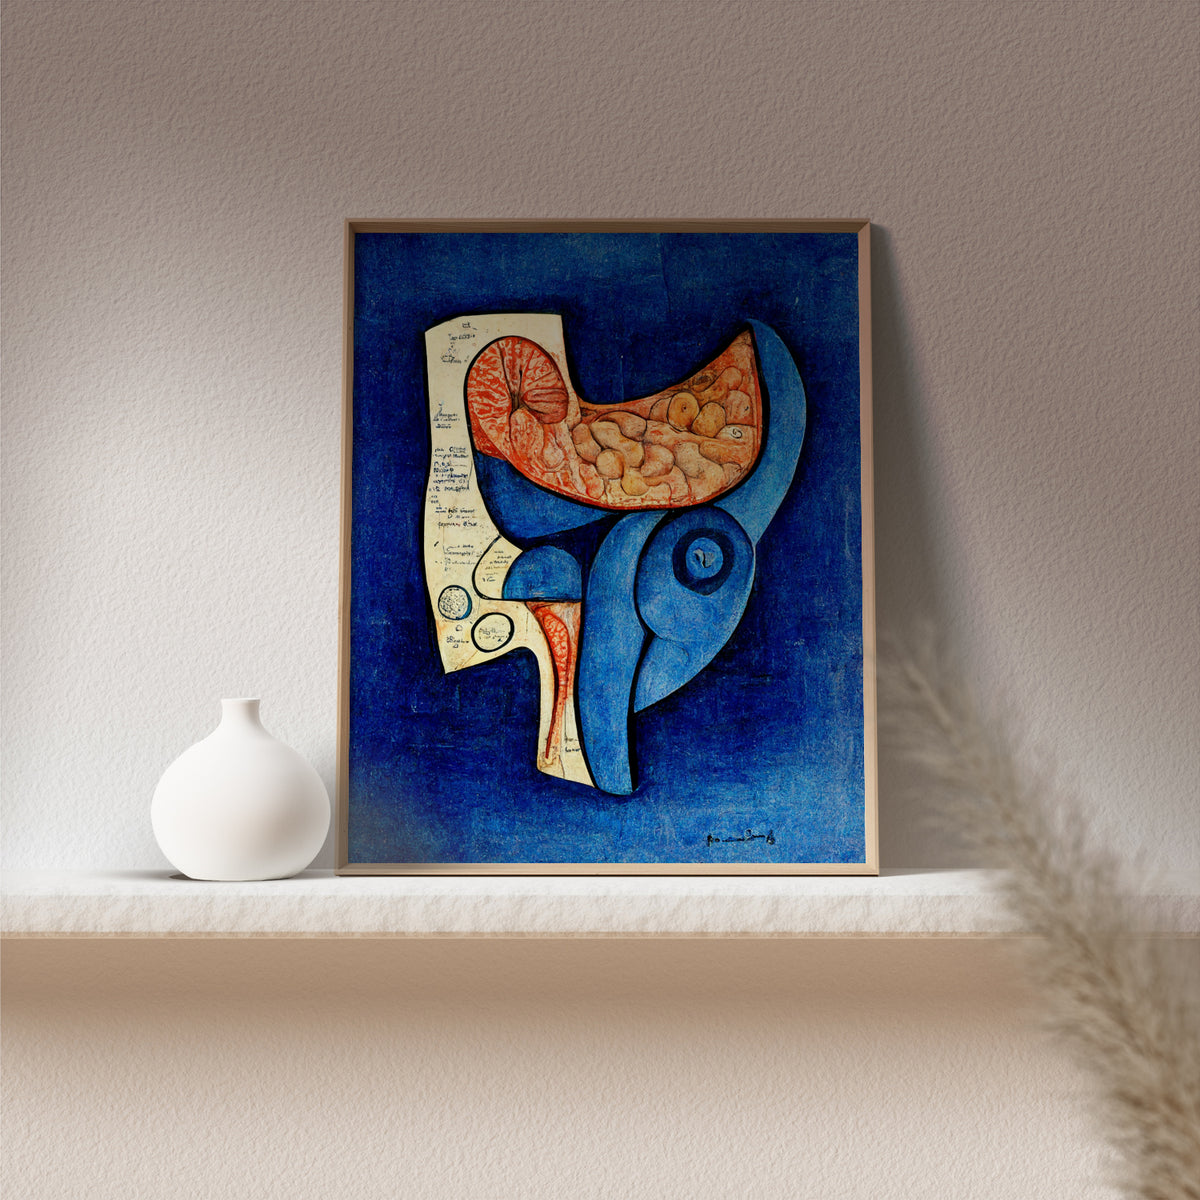  Endocrinology Art Prints - Abstract depictions of hormonal glands and systems, blending science and art.